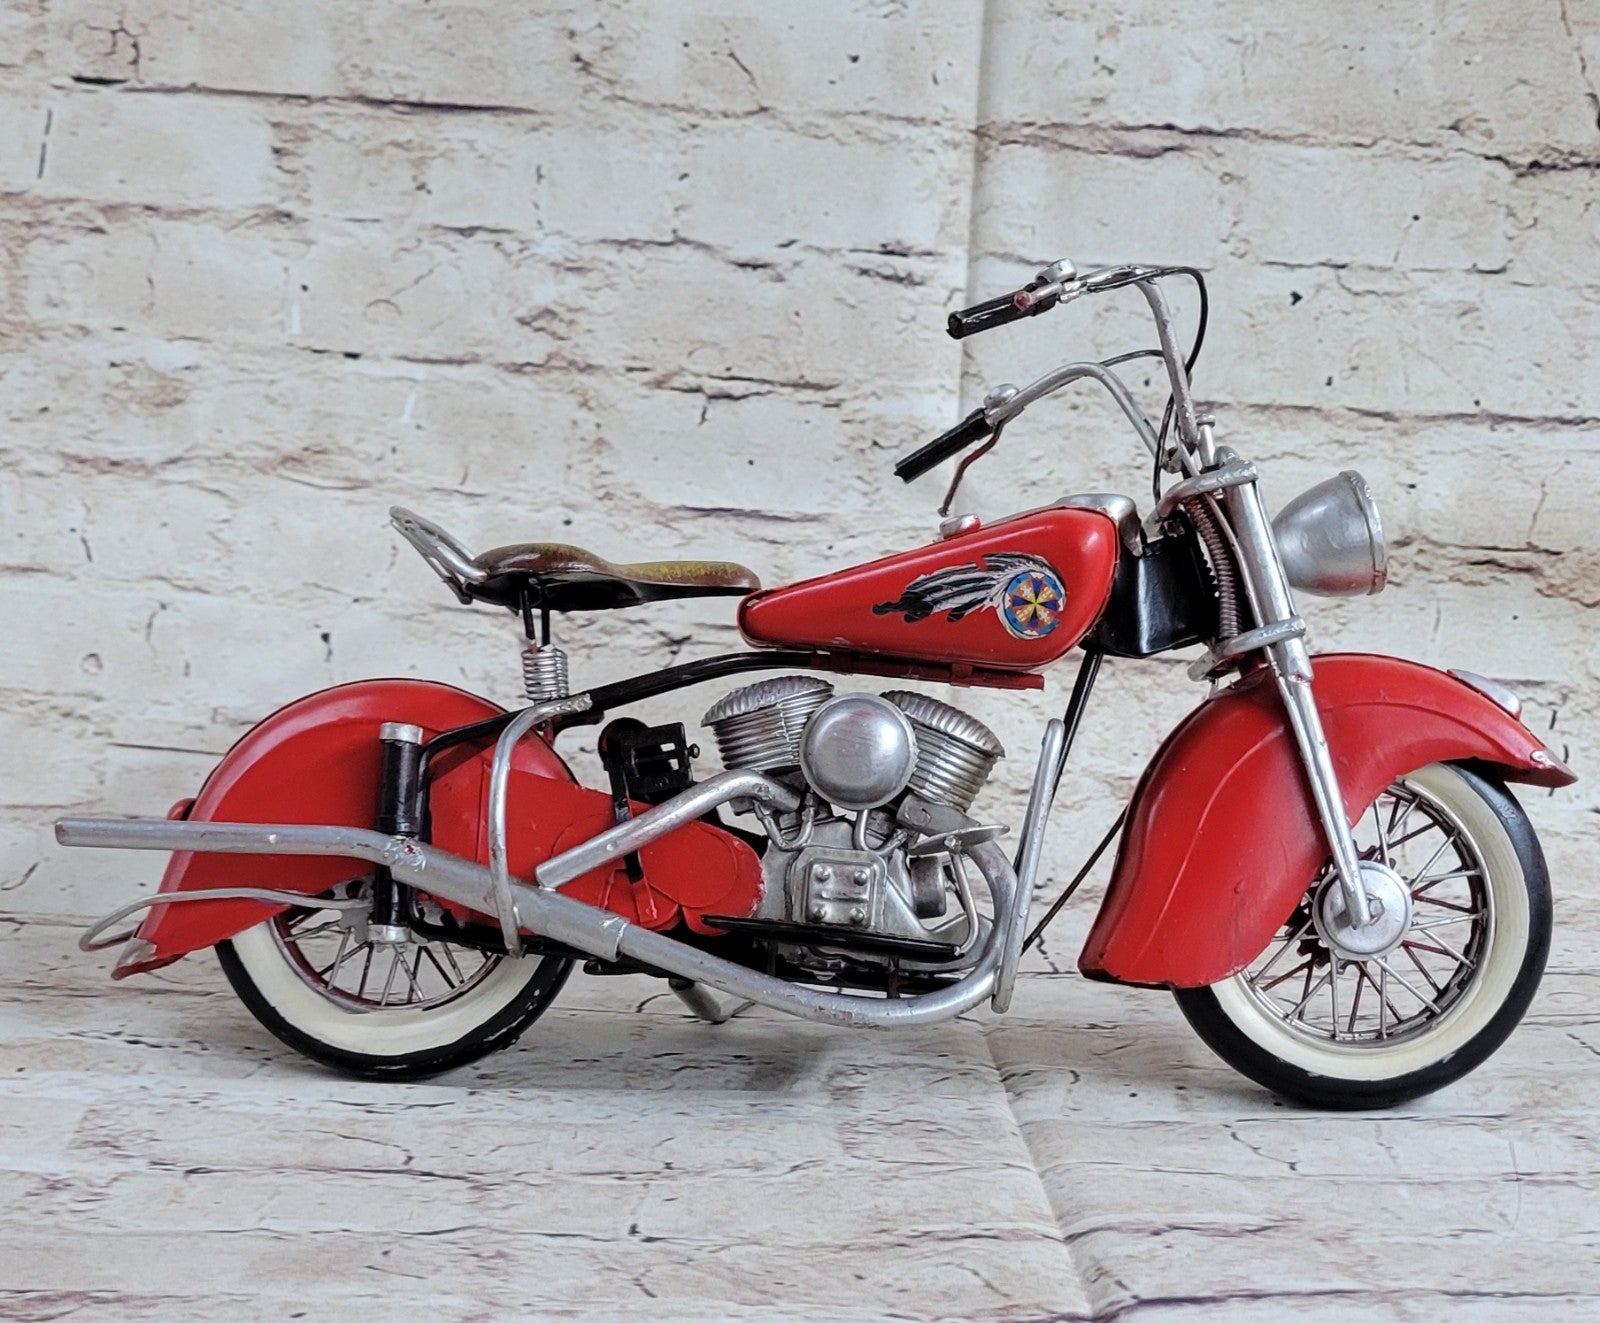 1945 RED HARLEY-DAVIDSON 1:8-SCALE Detailed Handcrafted Motorcycle Decoration